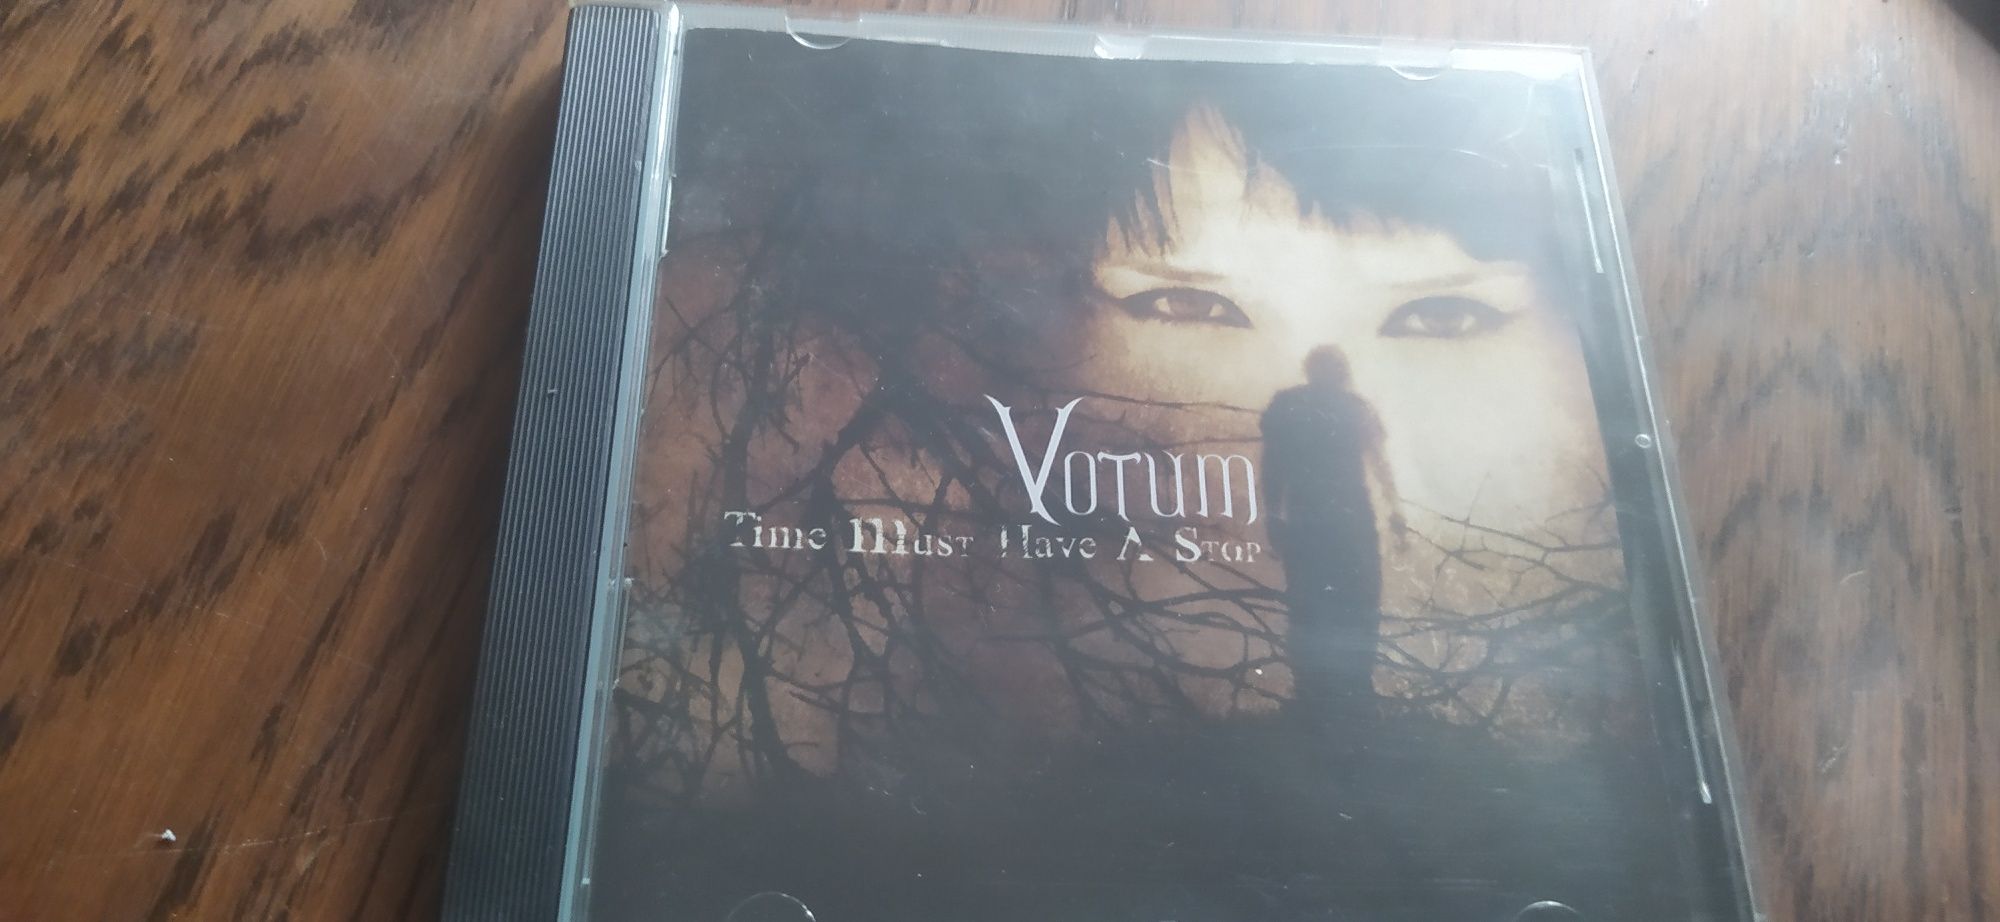 Votum Time Must Have A Stop CD